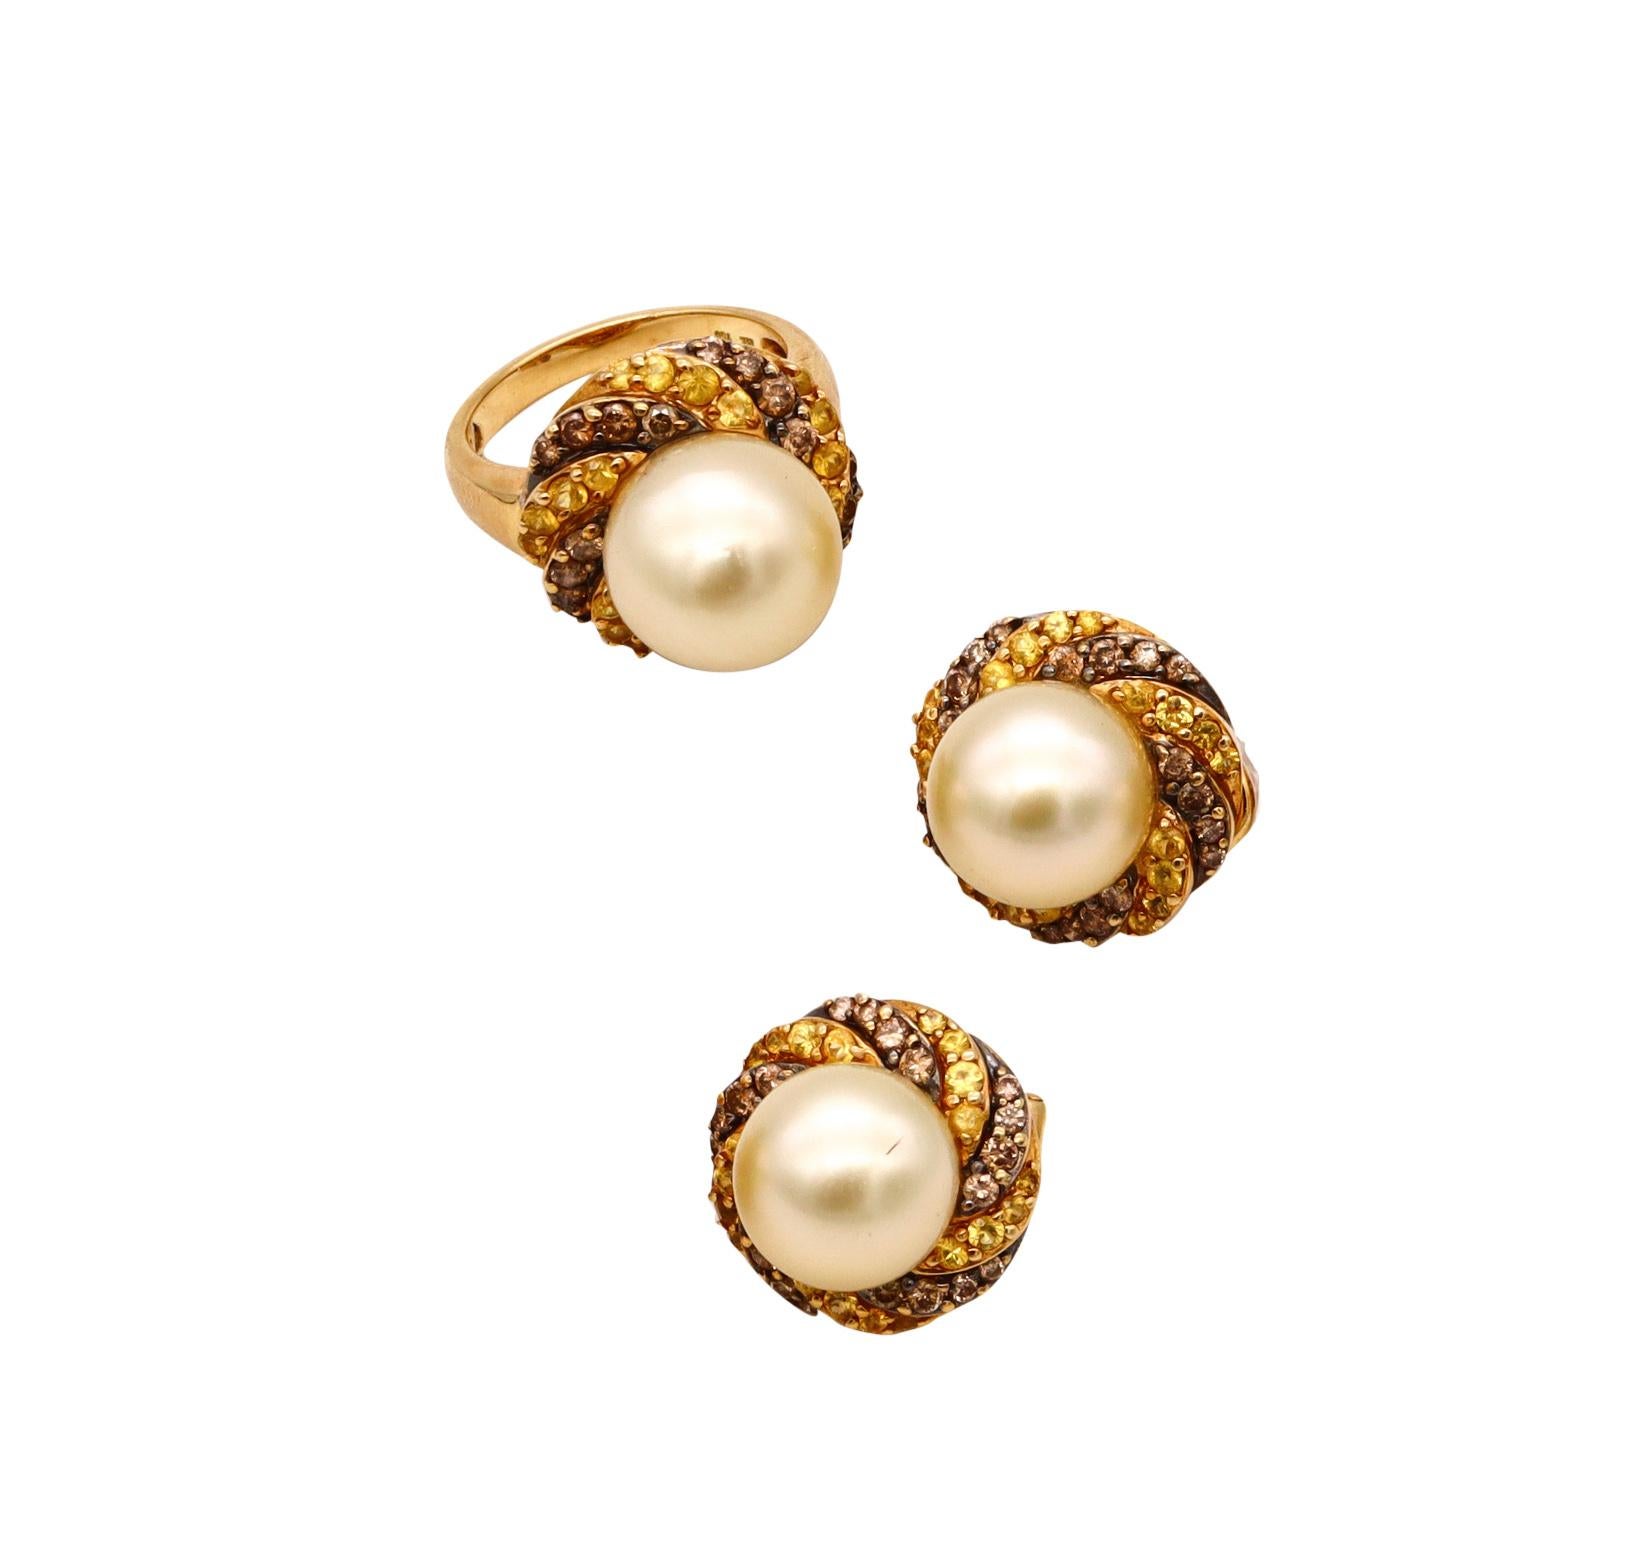 Italian Modern Suite in 18Kt Gold Akoya Pearls 4.20 Ctw Diamonds Sapphires For Sale 2